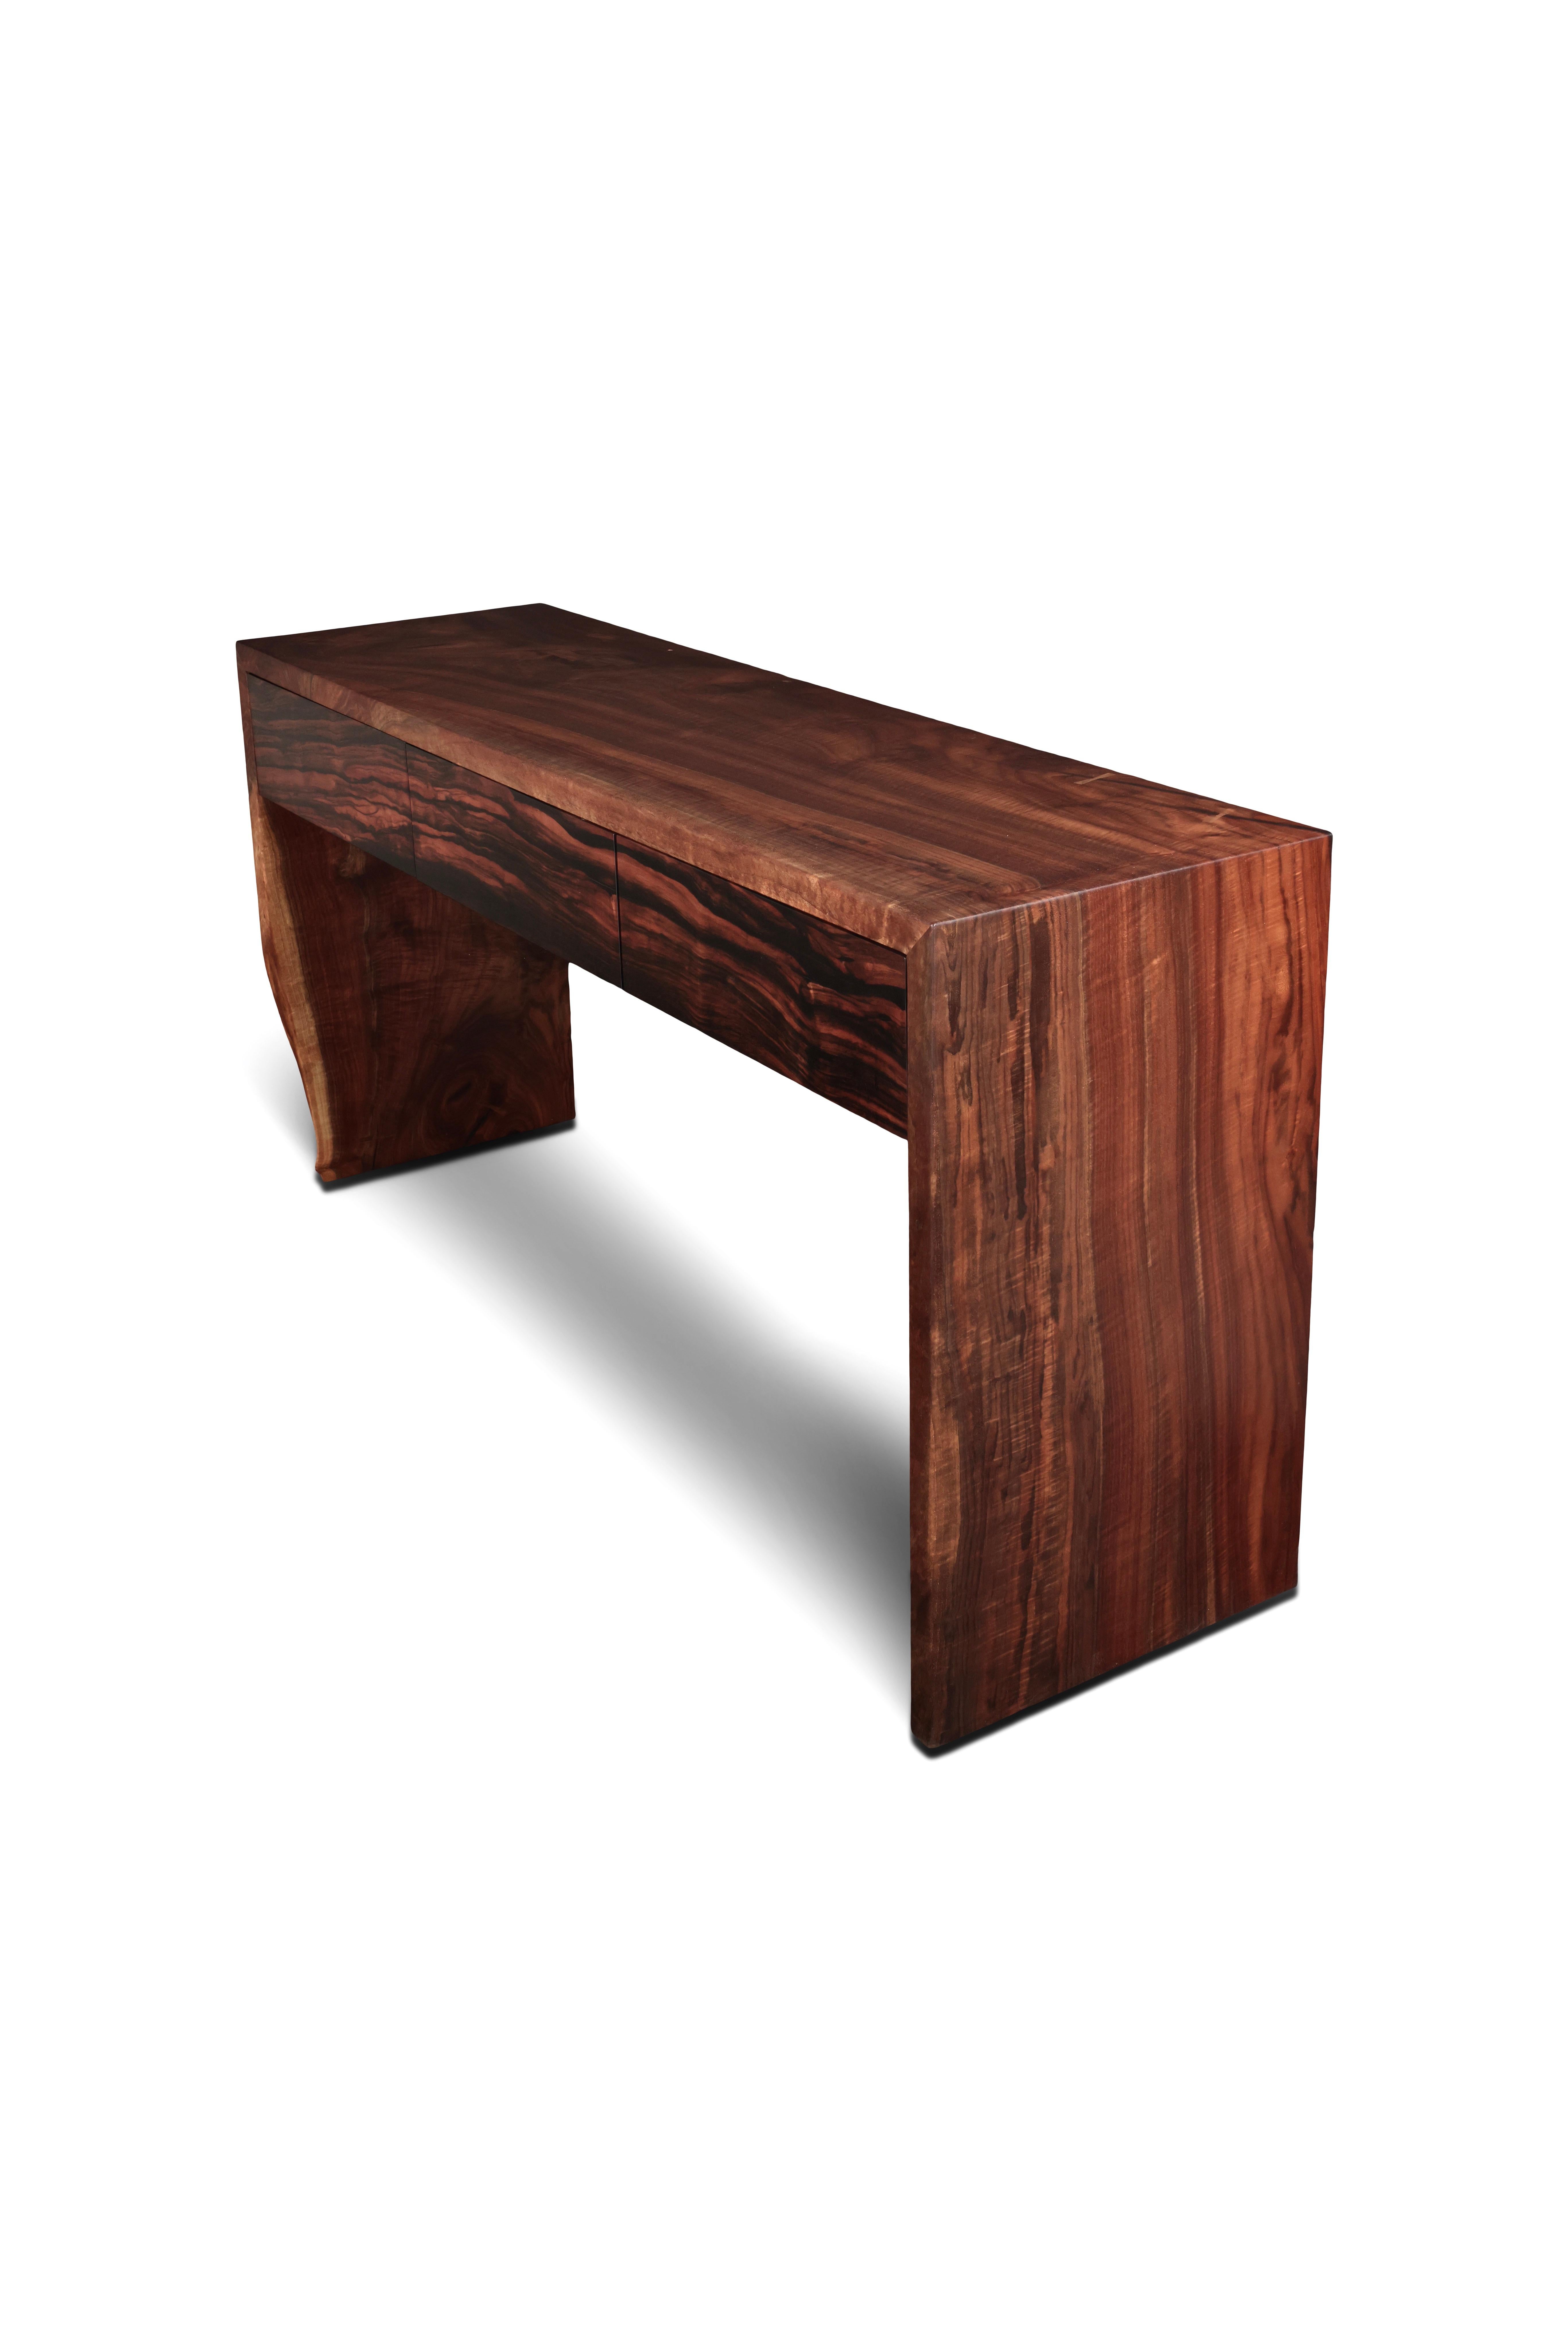 A single slab of figured Claro walnut creates a waterfall console table with an organic live edge detail down one leg. Beautifully contrasted with solid Macassar Ebony drawer fronts and solid Curly Maple, leather lined drawers. Exposed joinery and